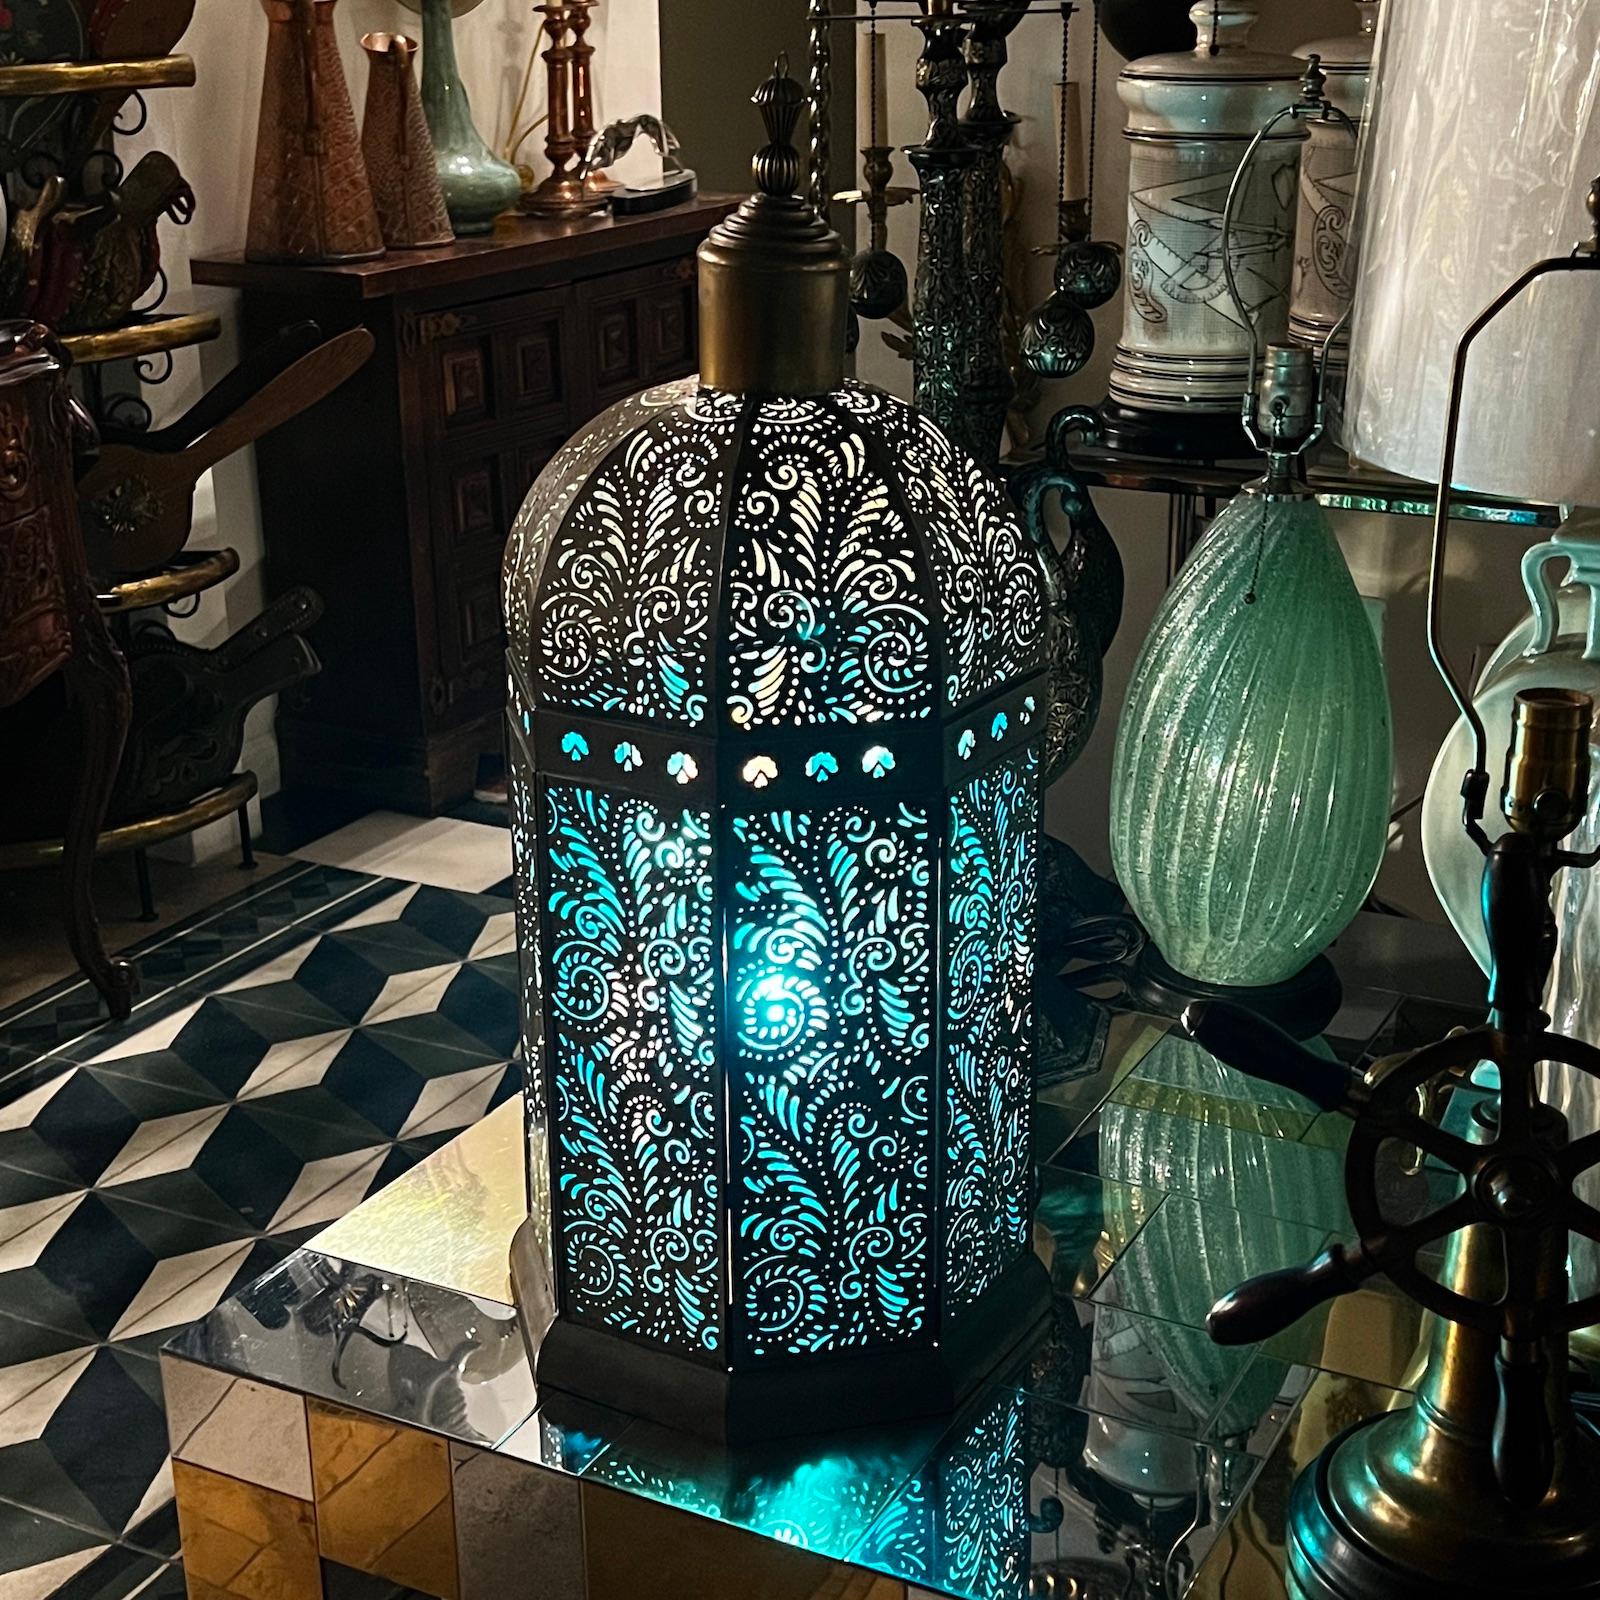 A circa 2000 vintage Turkish pierced brass lantern with turquoise glass inset.

Measurements:
Height: 28